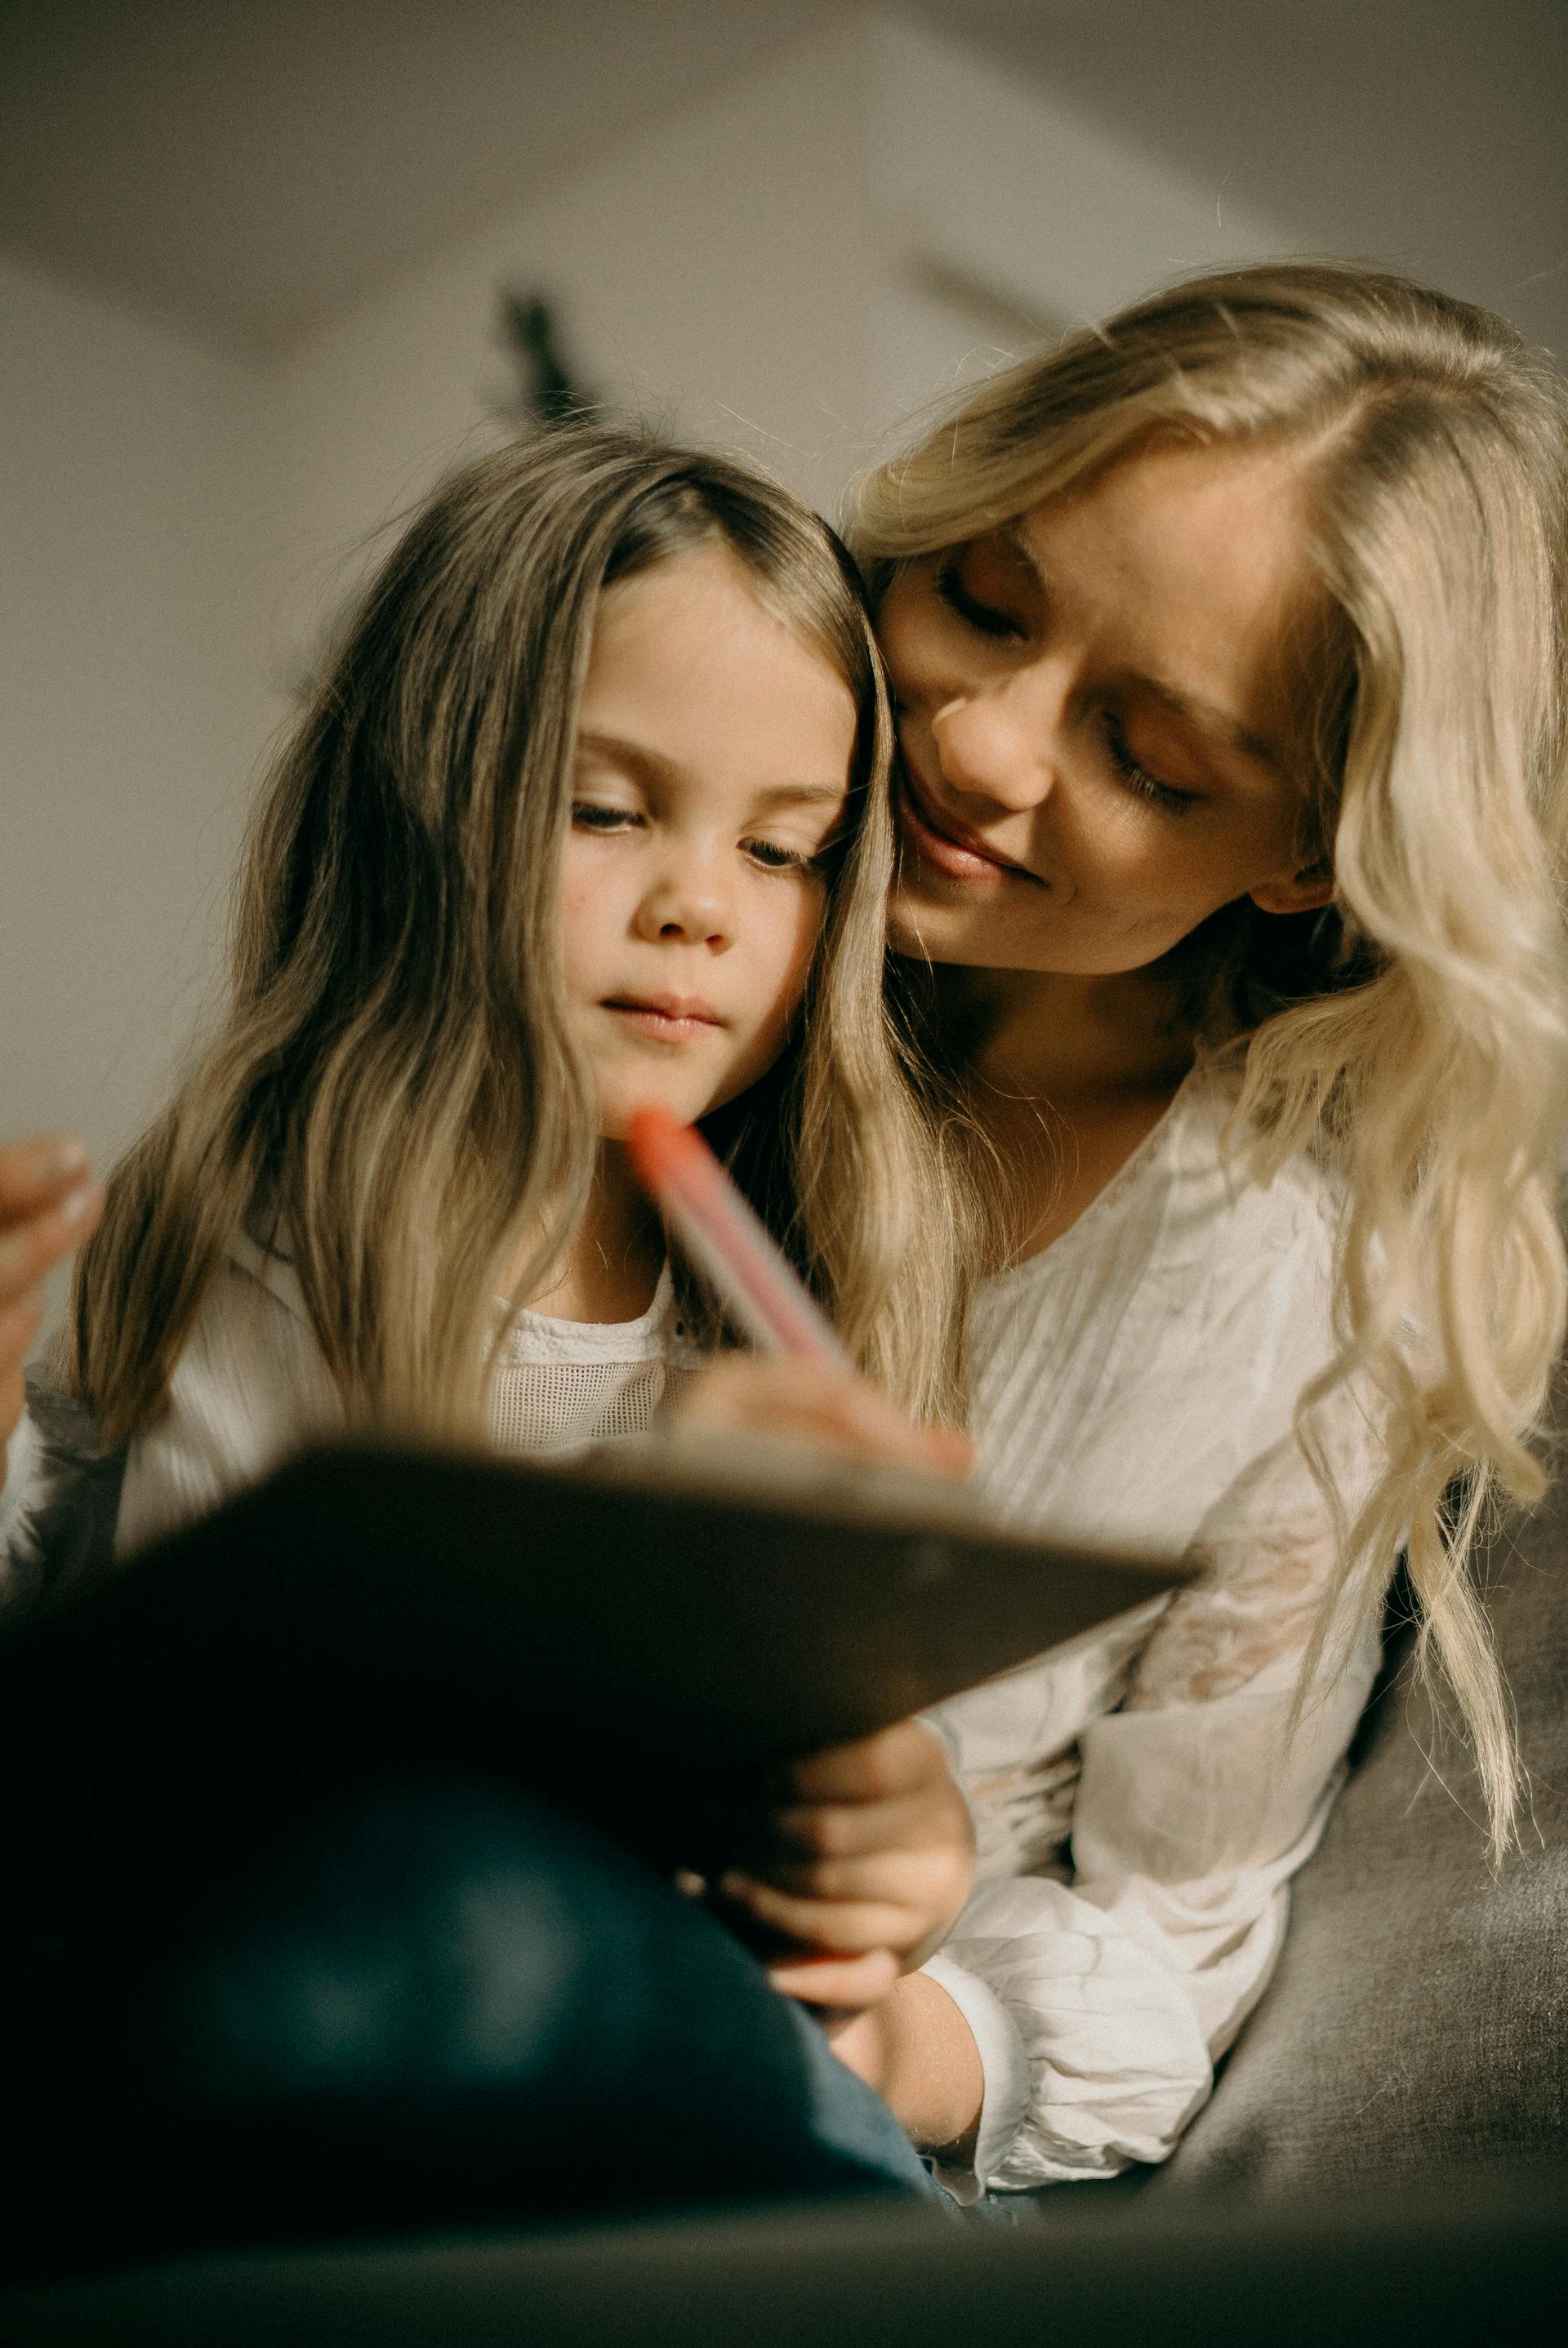 A little girl drawing something on a paper while sitting beside a blonde woman | Source: Pexels